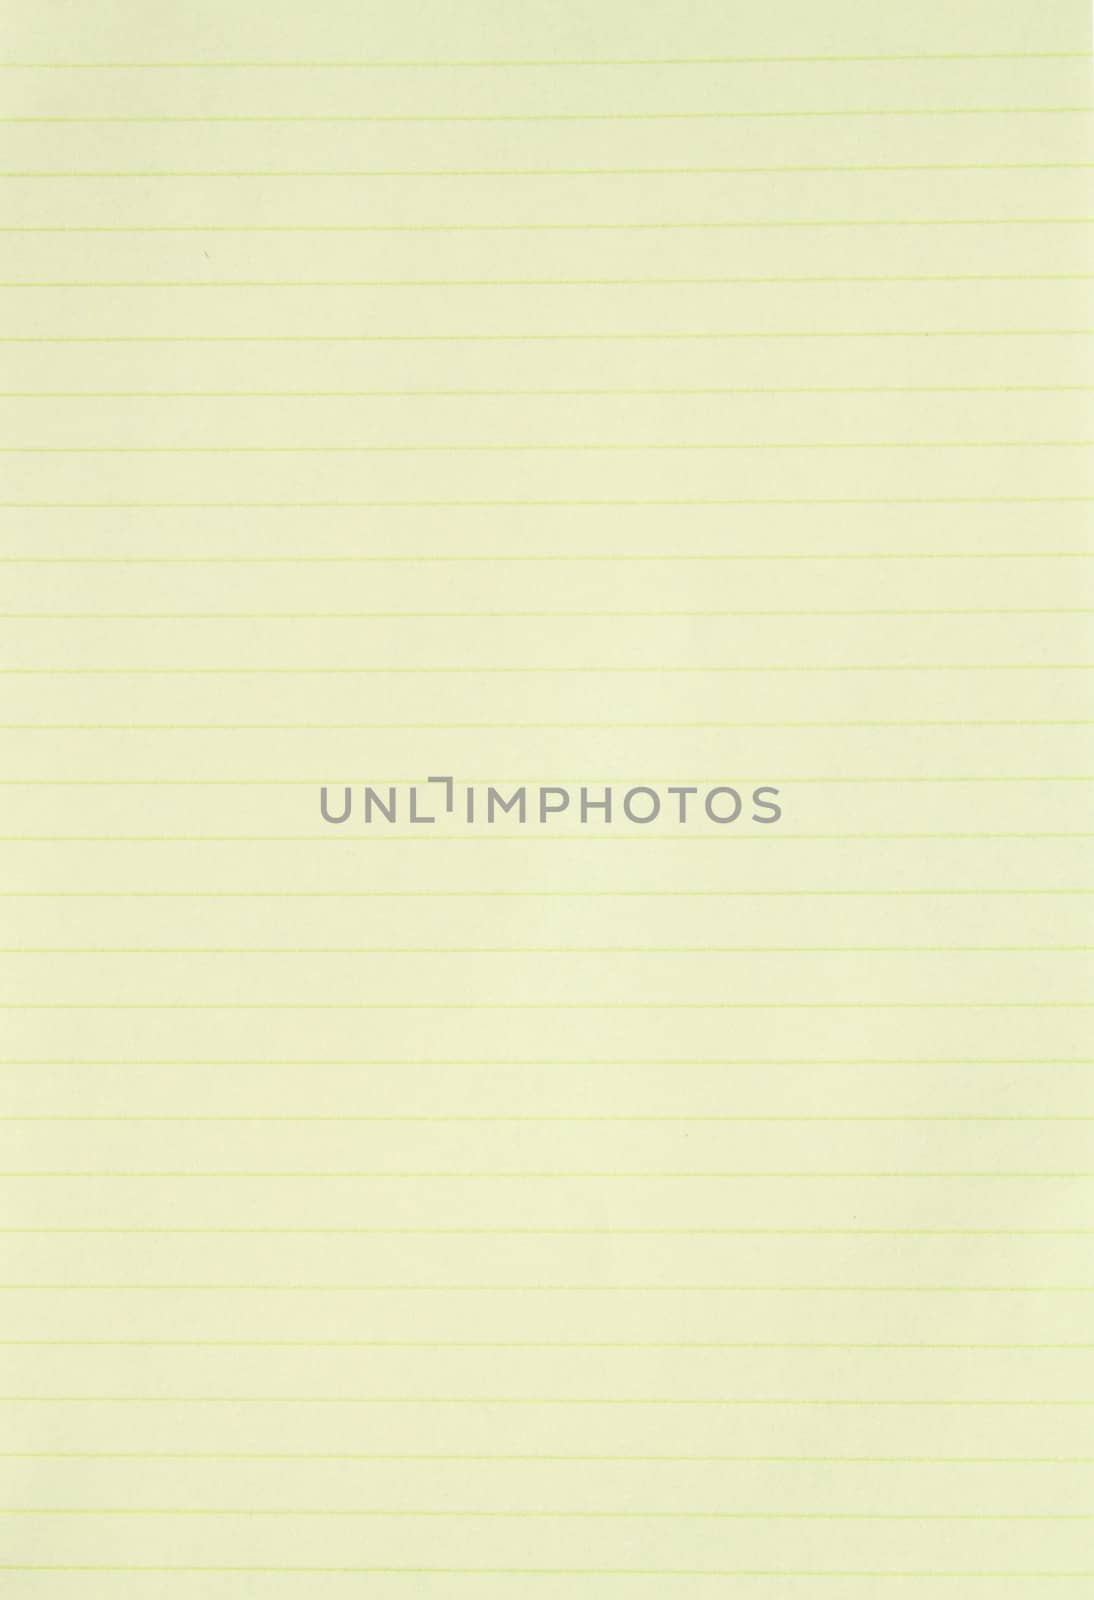 Blank yellow lined paper background or textured  by nuchylee